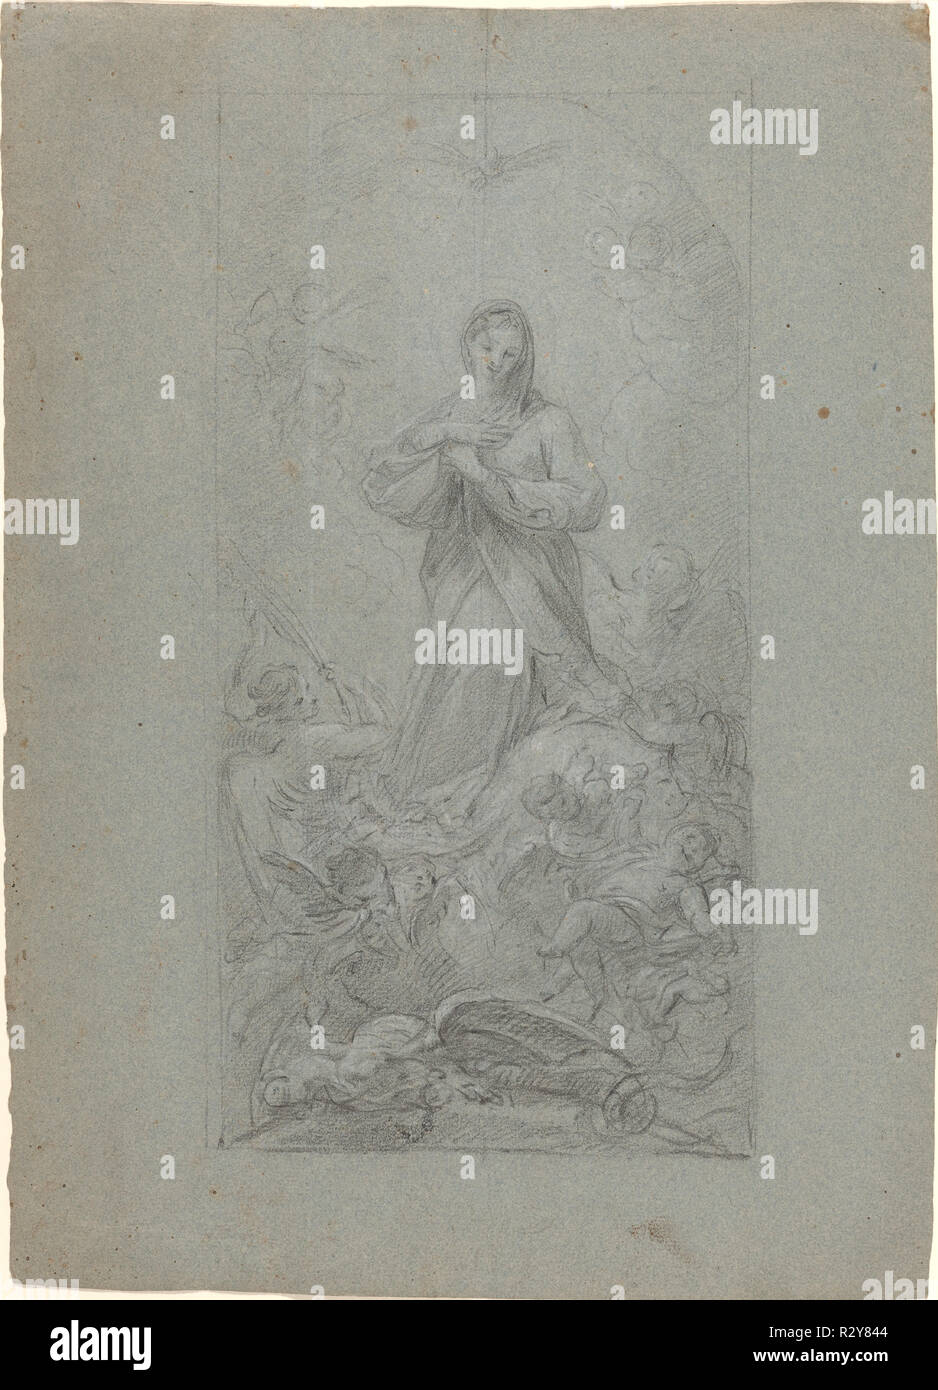 The Virgin Immaculate. Dated: 1726/28?. Dimensions: overall: 40 x 29 cm (15 3/4 x 11 7/16 in.). Medium: black chalk heightened with white on blue paper. Museum: National Gallery of Art, Washington DC. Author: Martino Altomonte. Stock Photo